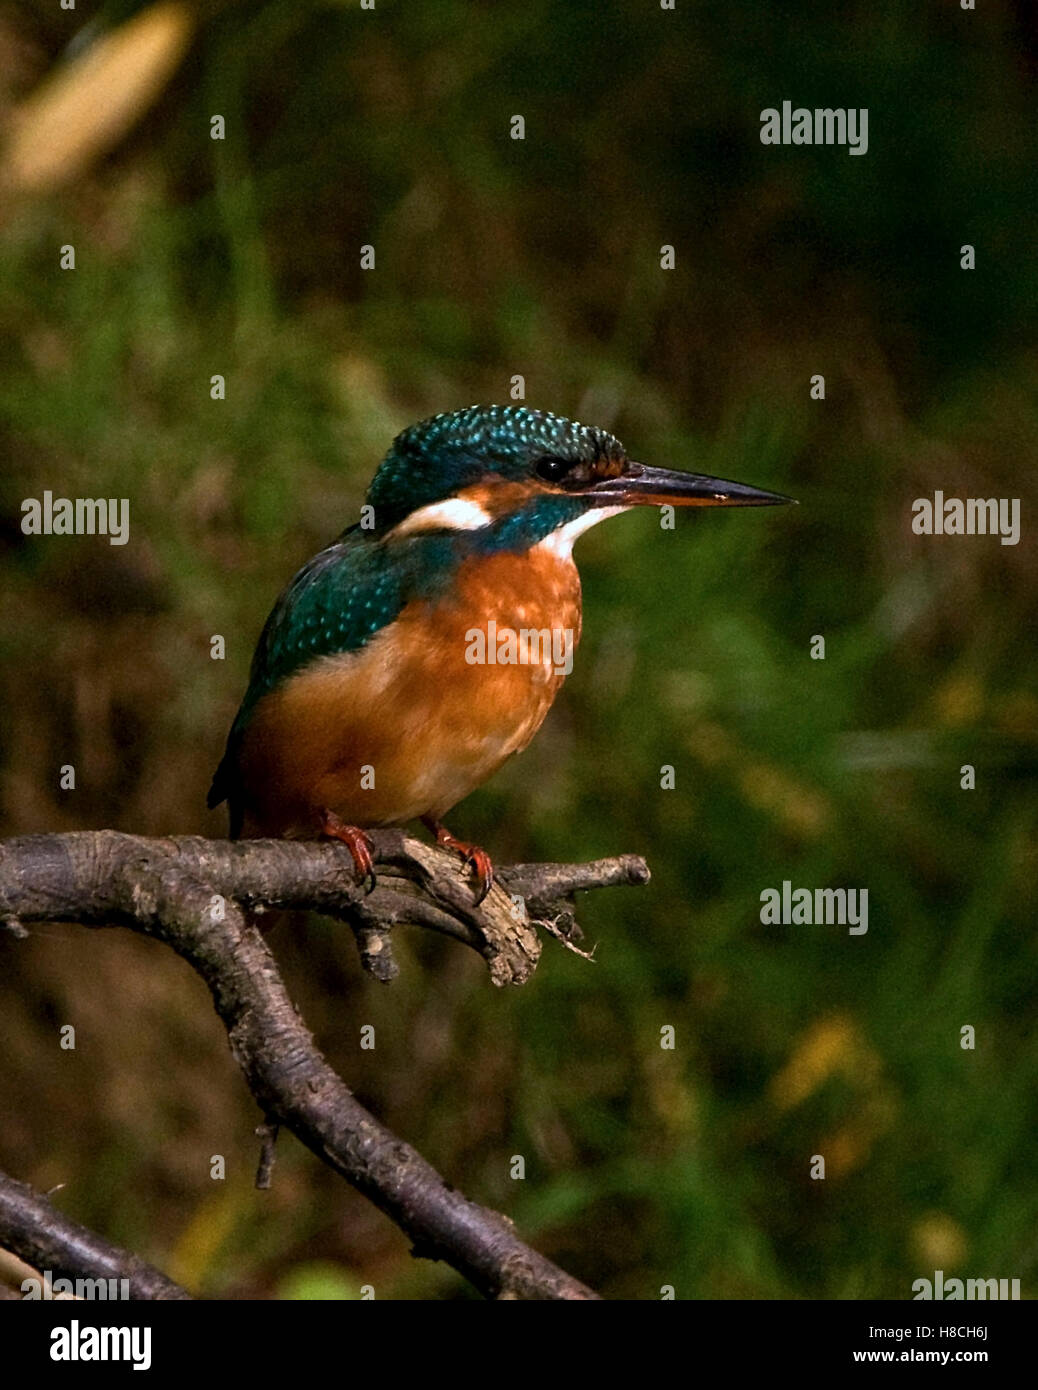 A Female Kingfisher roosting Stock Photo